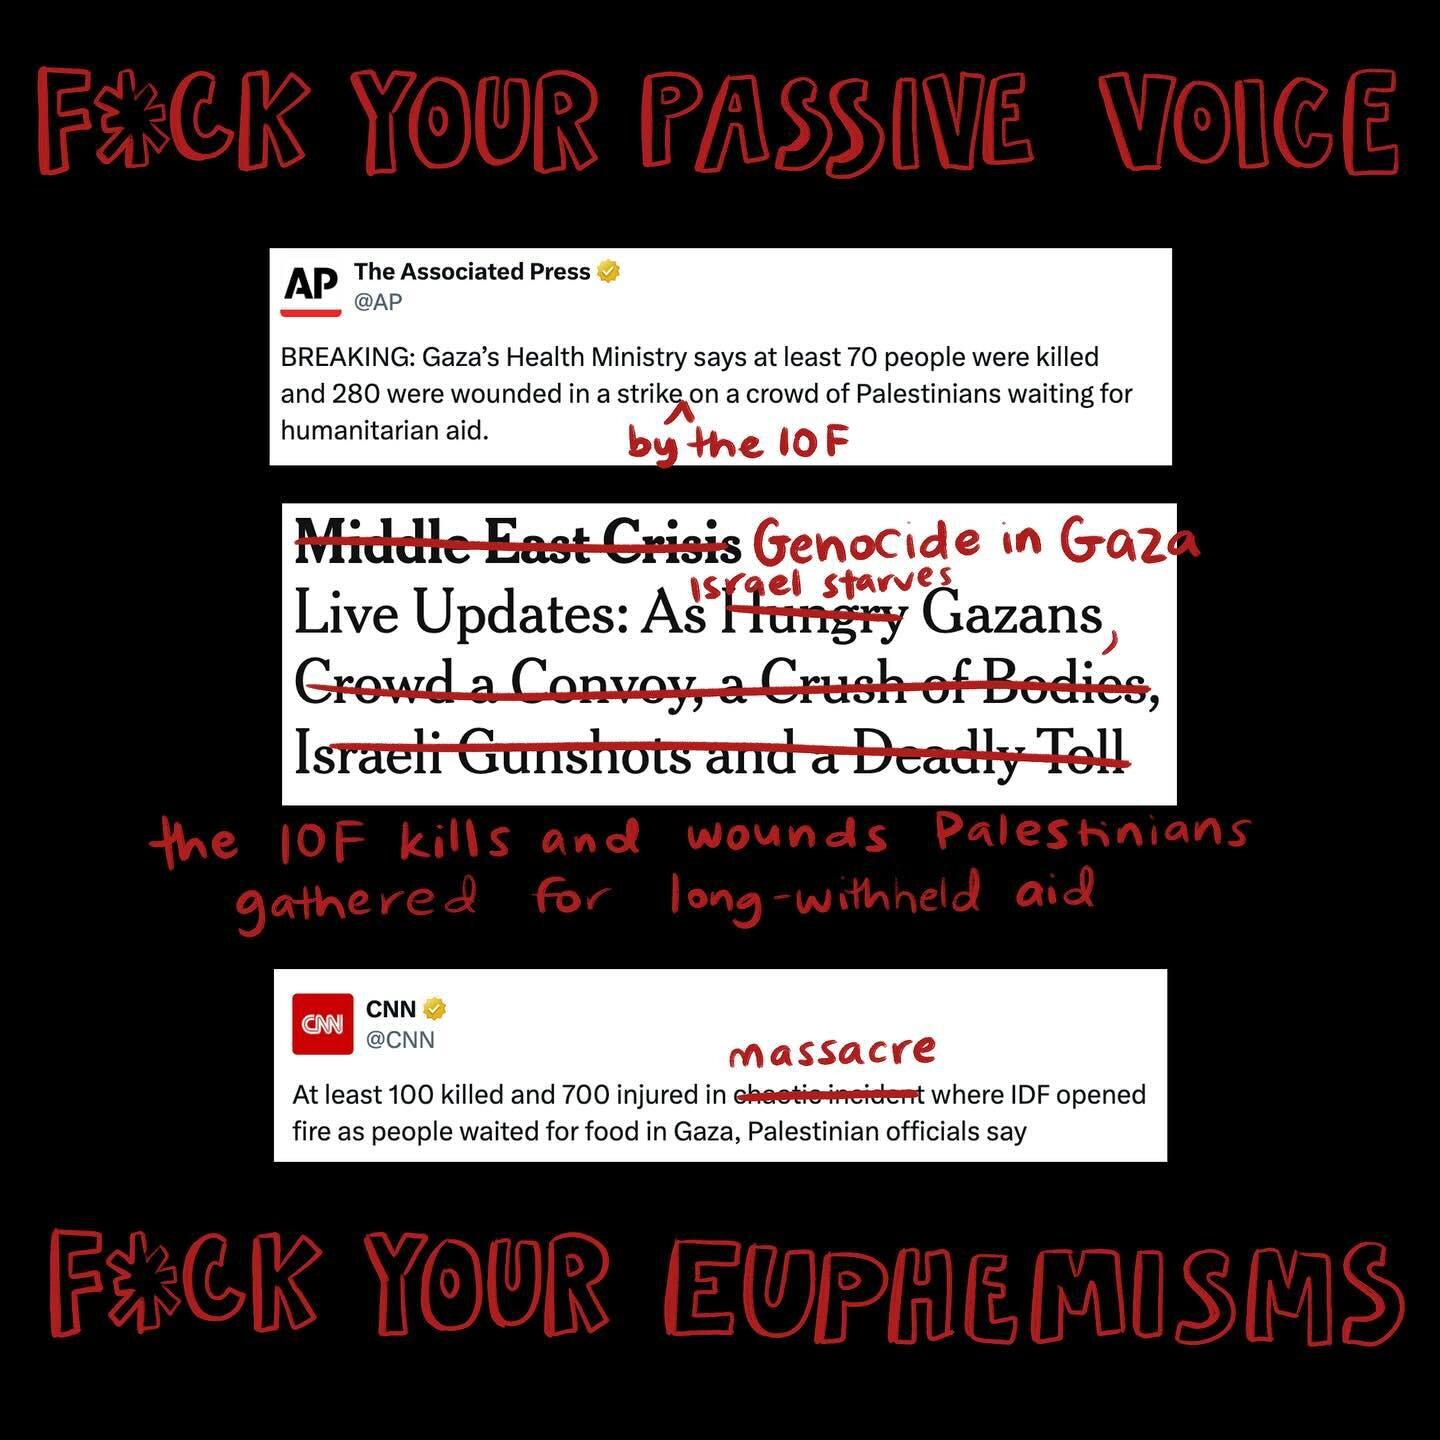 THE IOF HAS KILLED OVER 30,000 PALESTINIANS. ISRAEL IS STARVING GAZANS. &amp; yet American media - including the New York Times, CNN, &amp; Associated Press - continues to publish headlines that use the passive voice, as though Gazans are mysteriousl